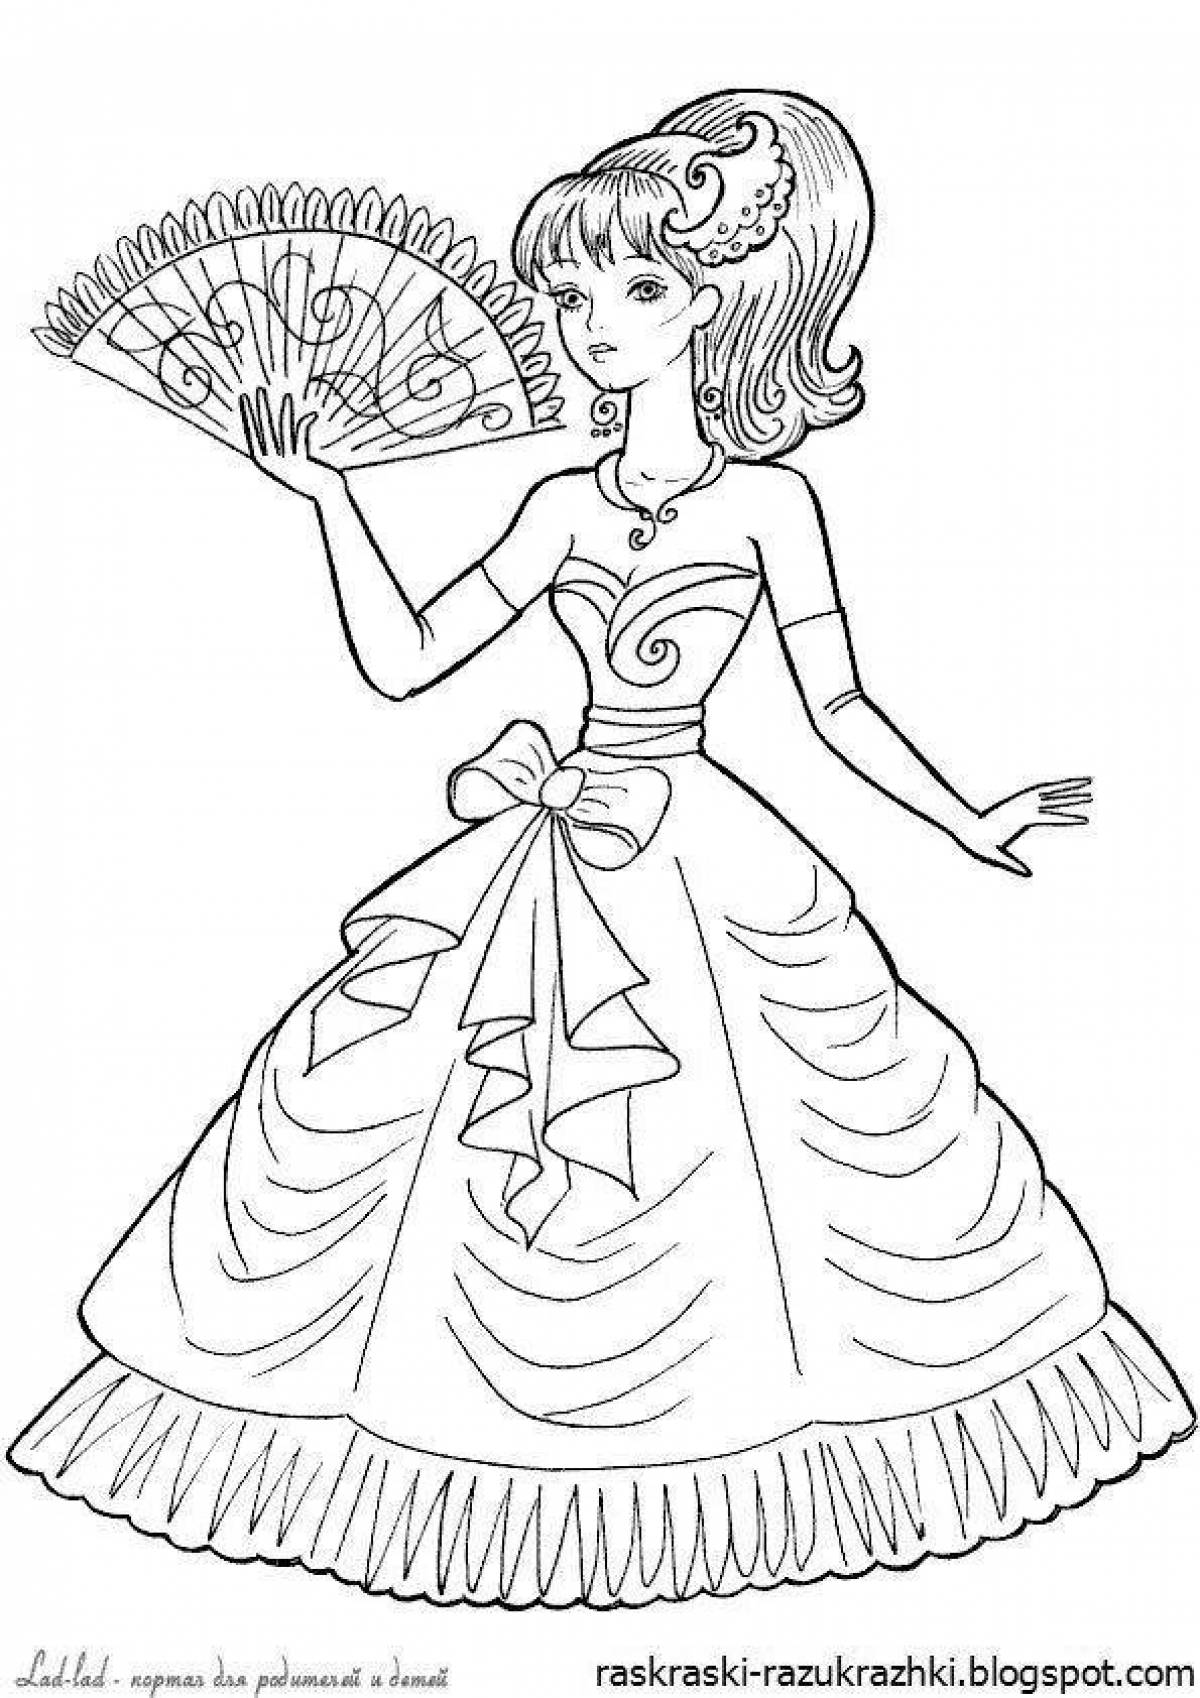 Charming coloring book for girls princesses in beautiful dresses